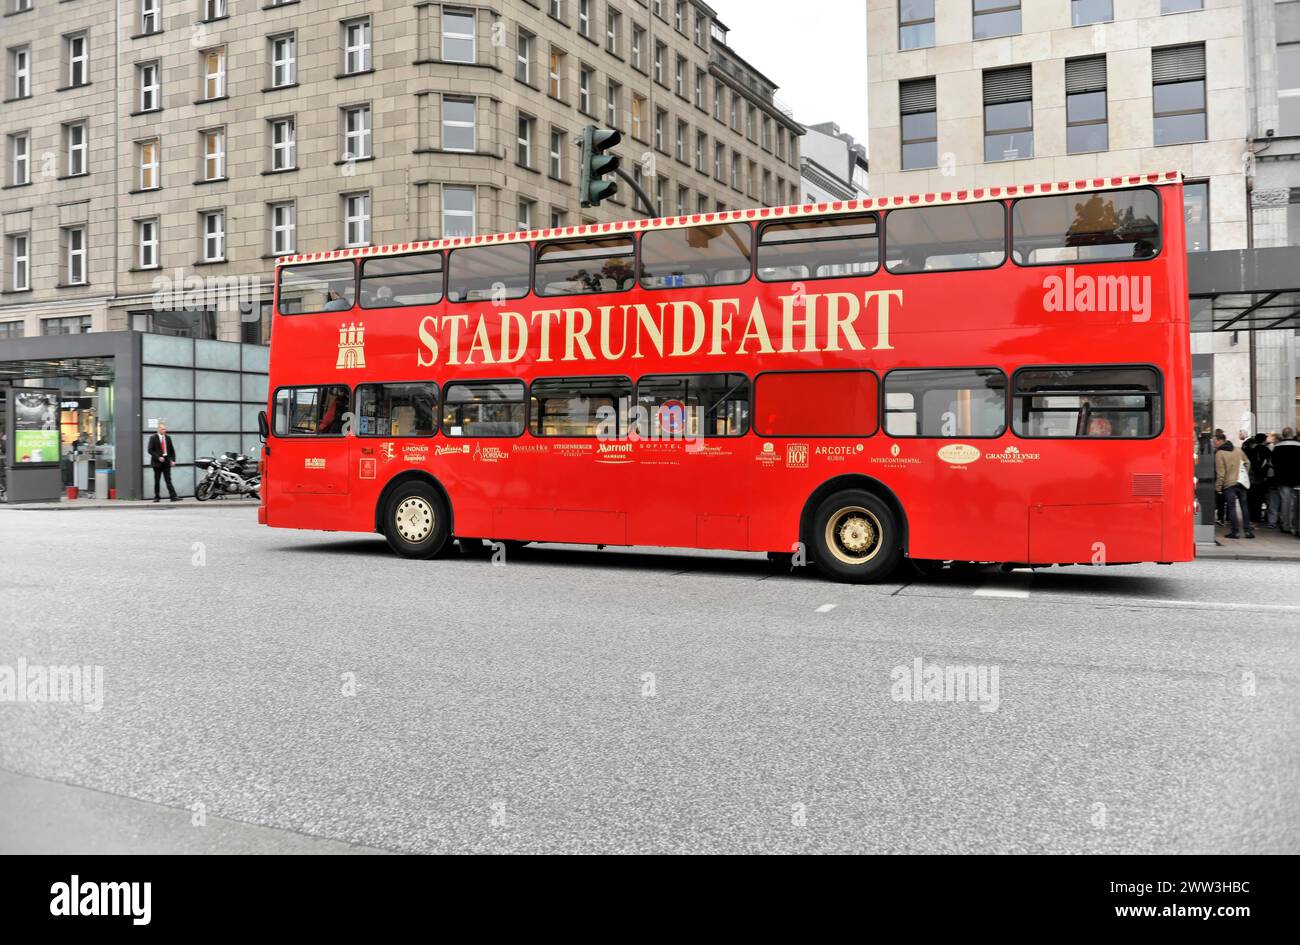 A red sightseeing double-decker bus travelling on a city street, Hamburg, Hanseatic City of Hamburg, Germany Stock Photo